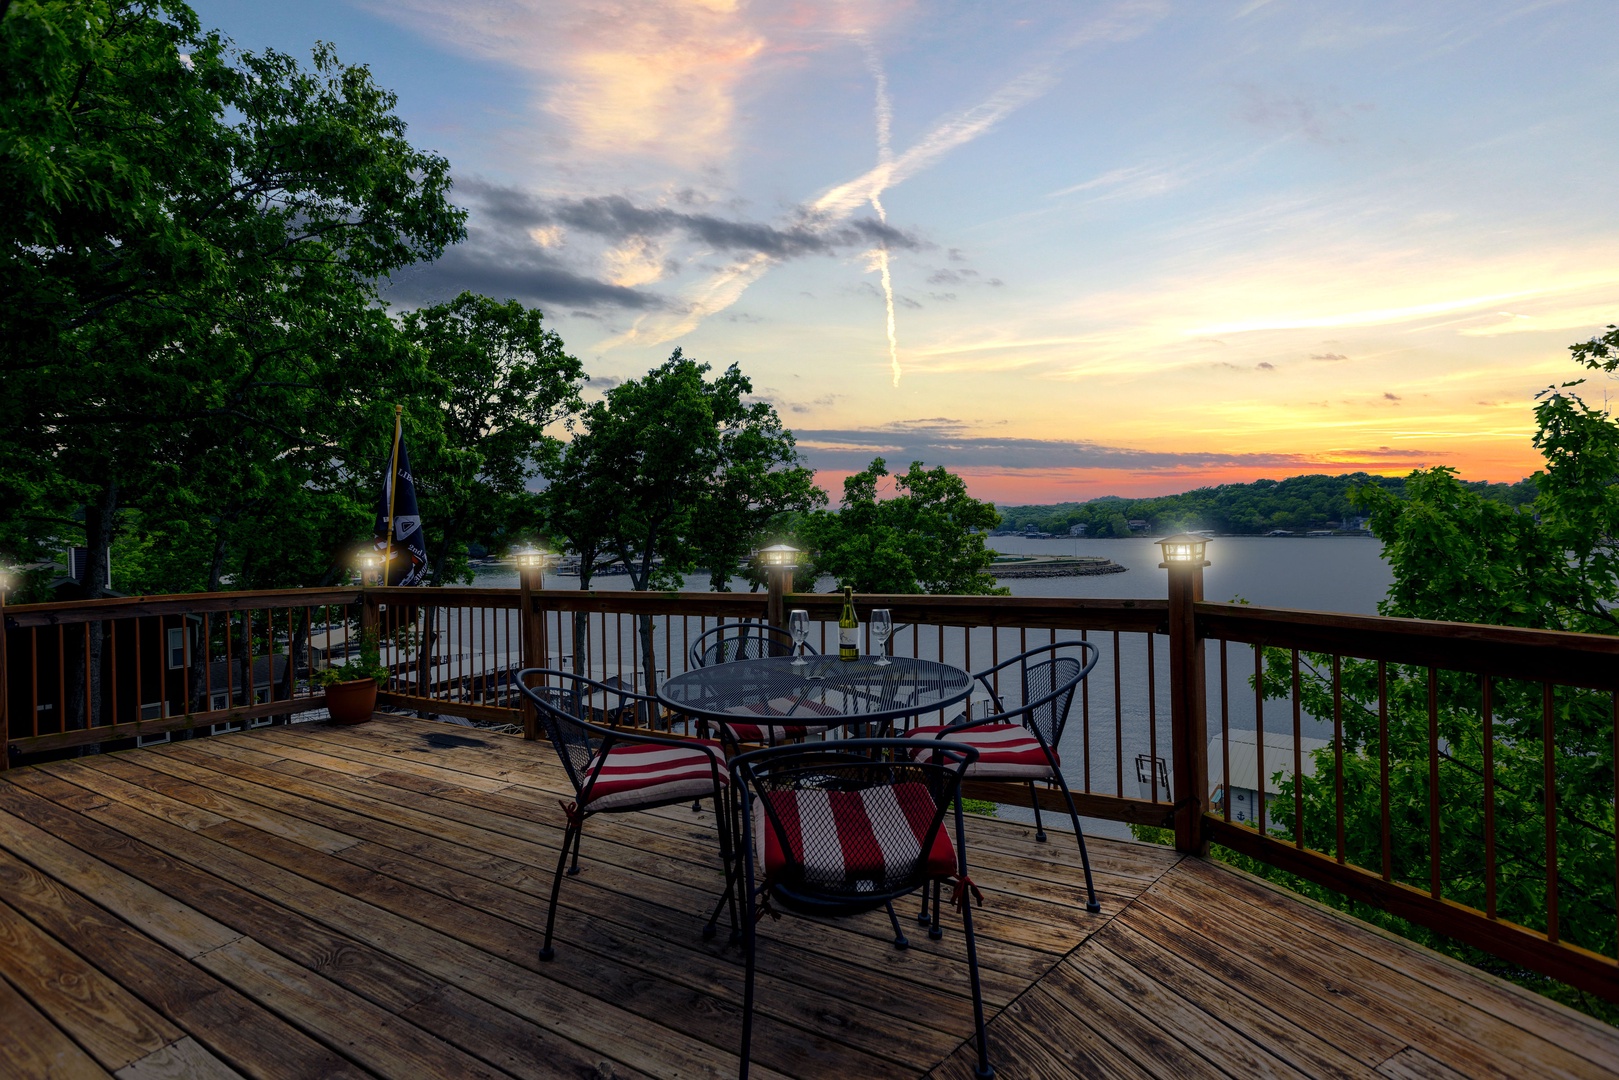 Retreat to the deck offering breathtaking evening vistas, complete with ample seating